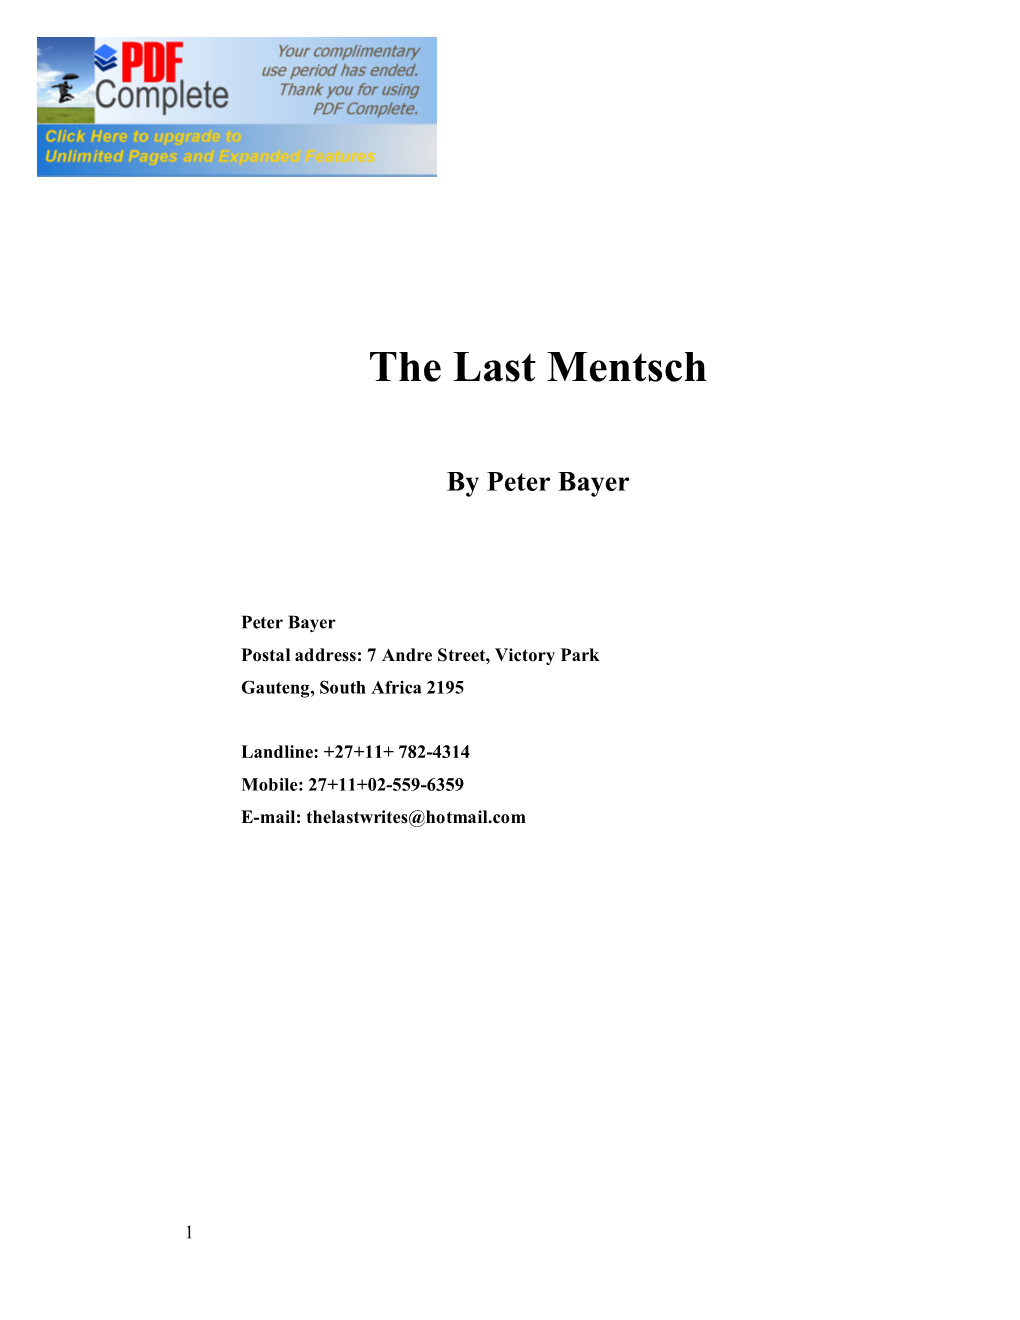 The Last Mentsch by Peter Bayer